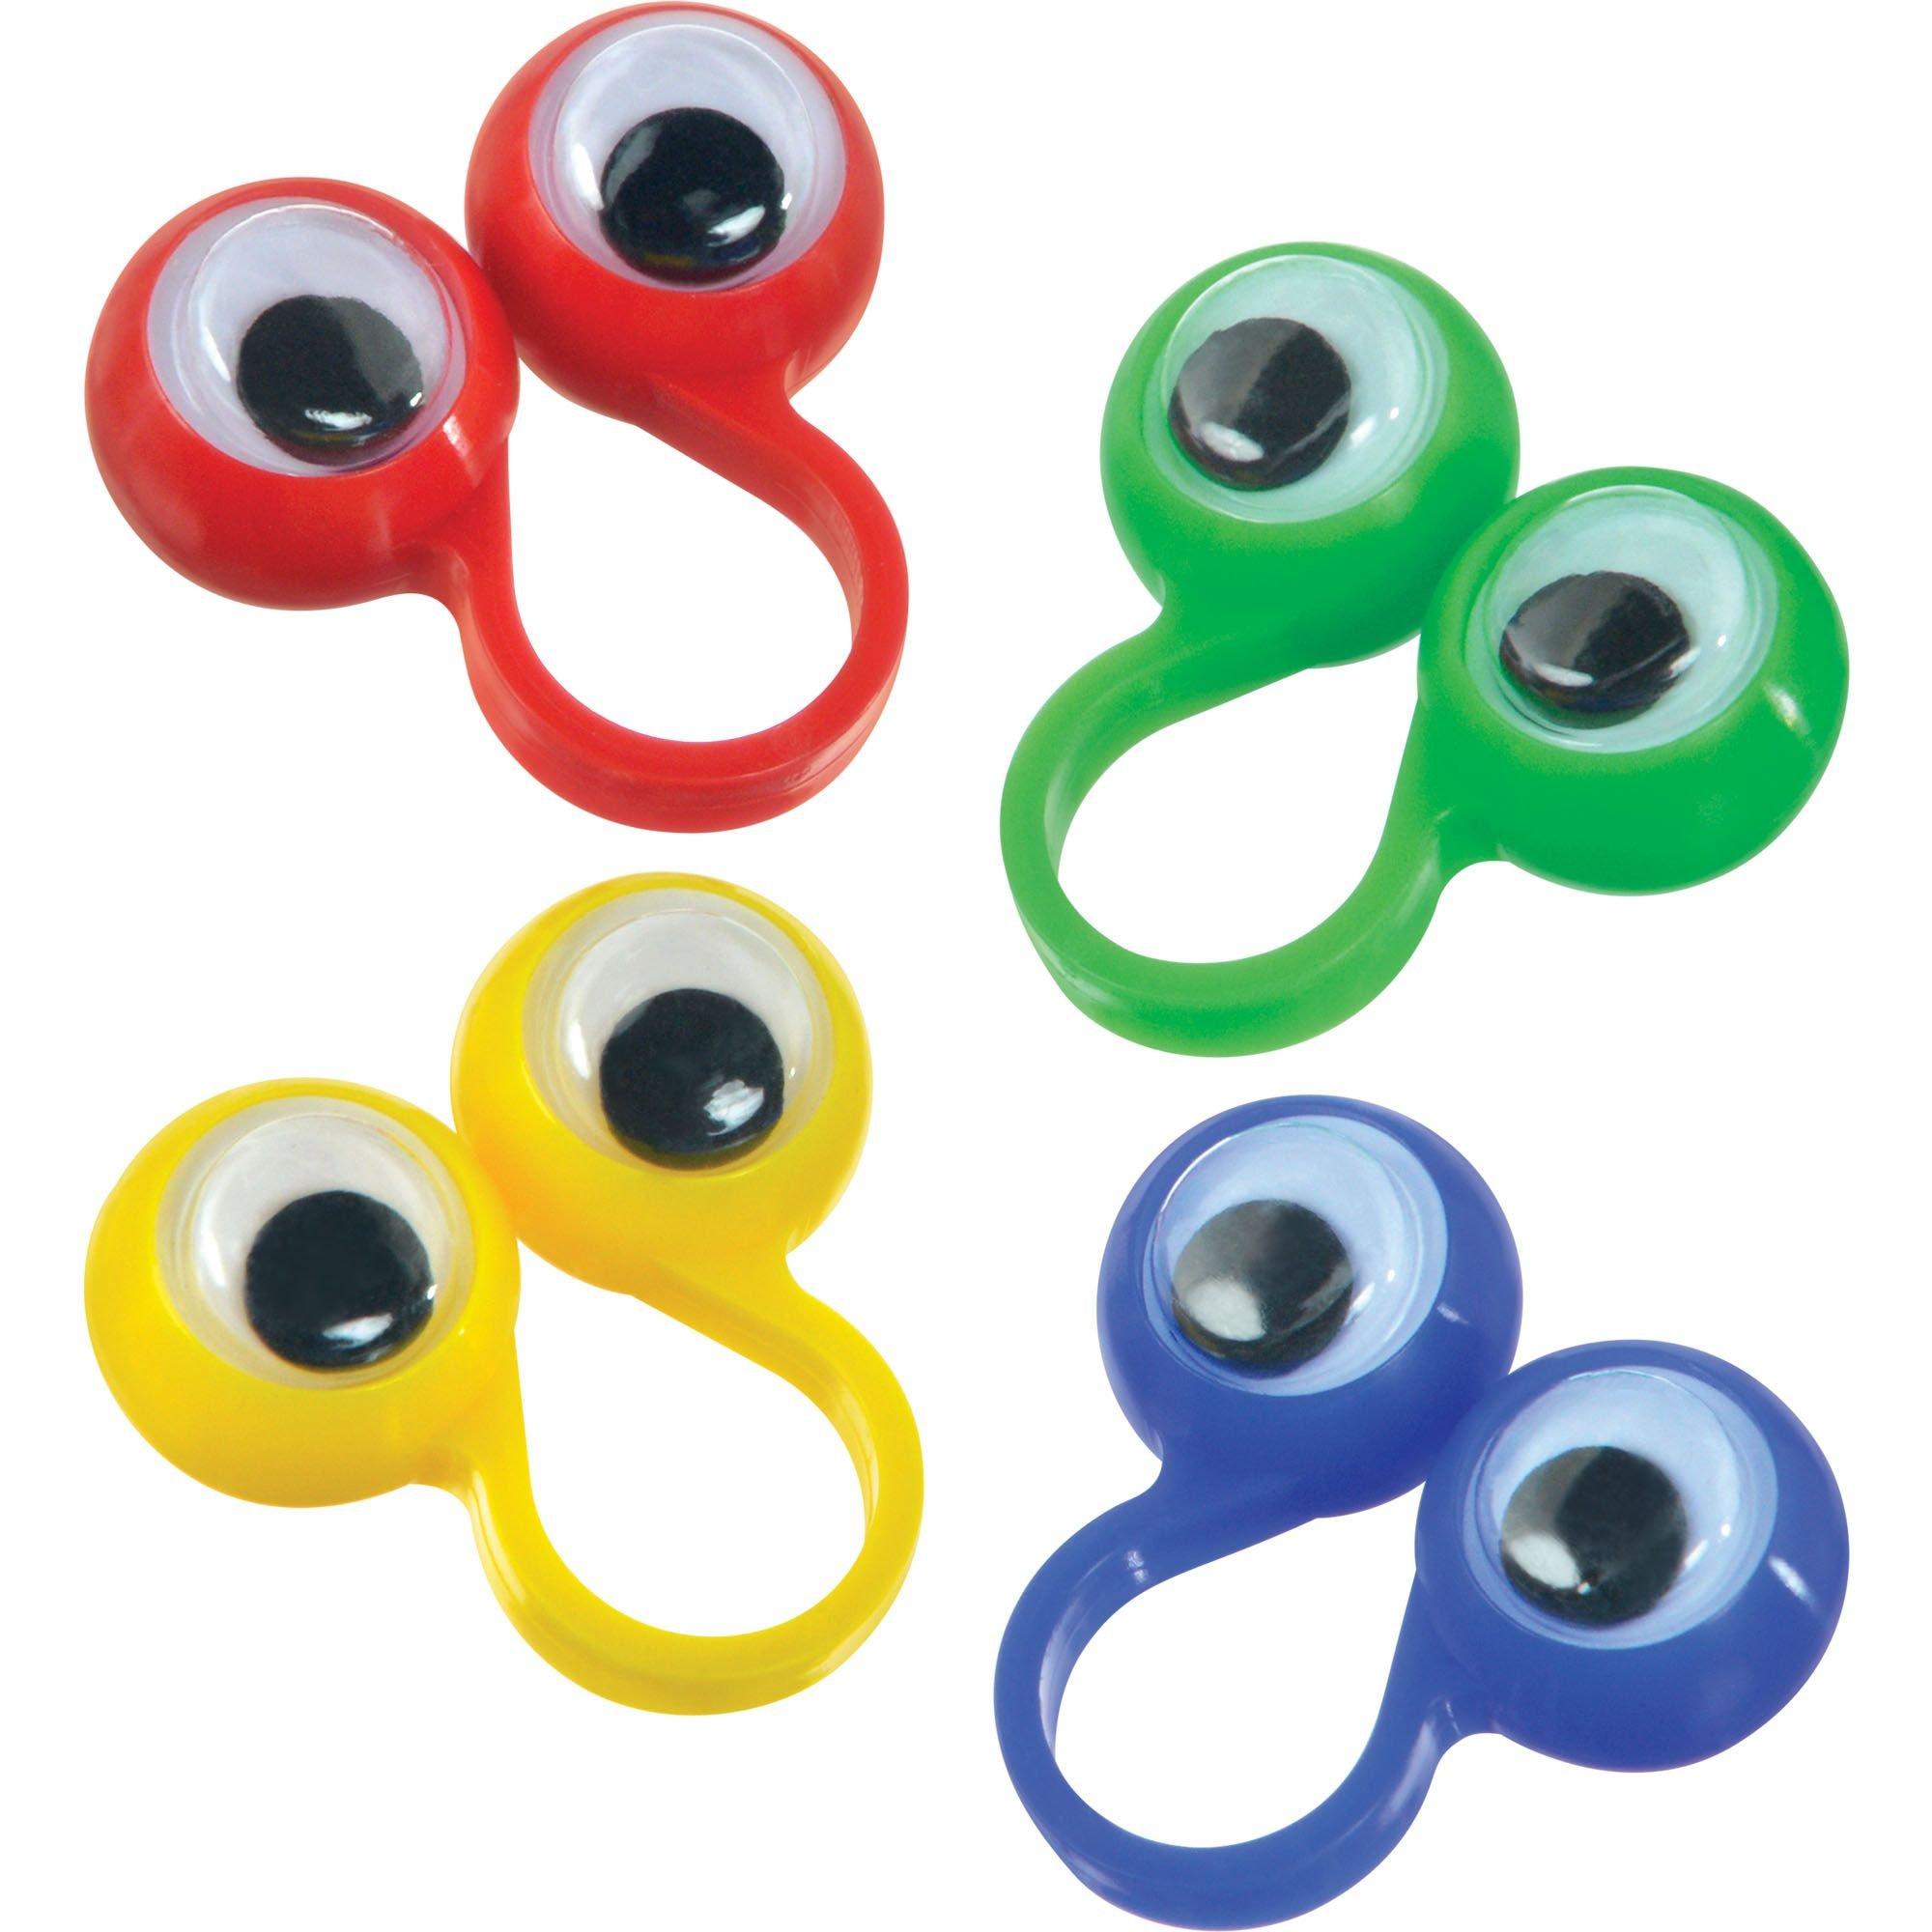 Googly Eyes - Party Time, Inc.